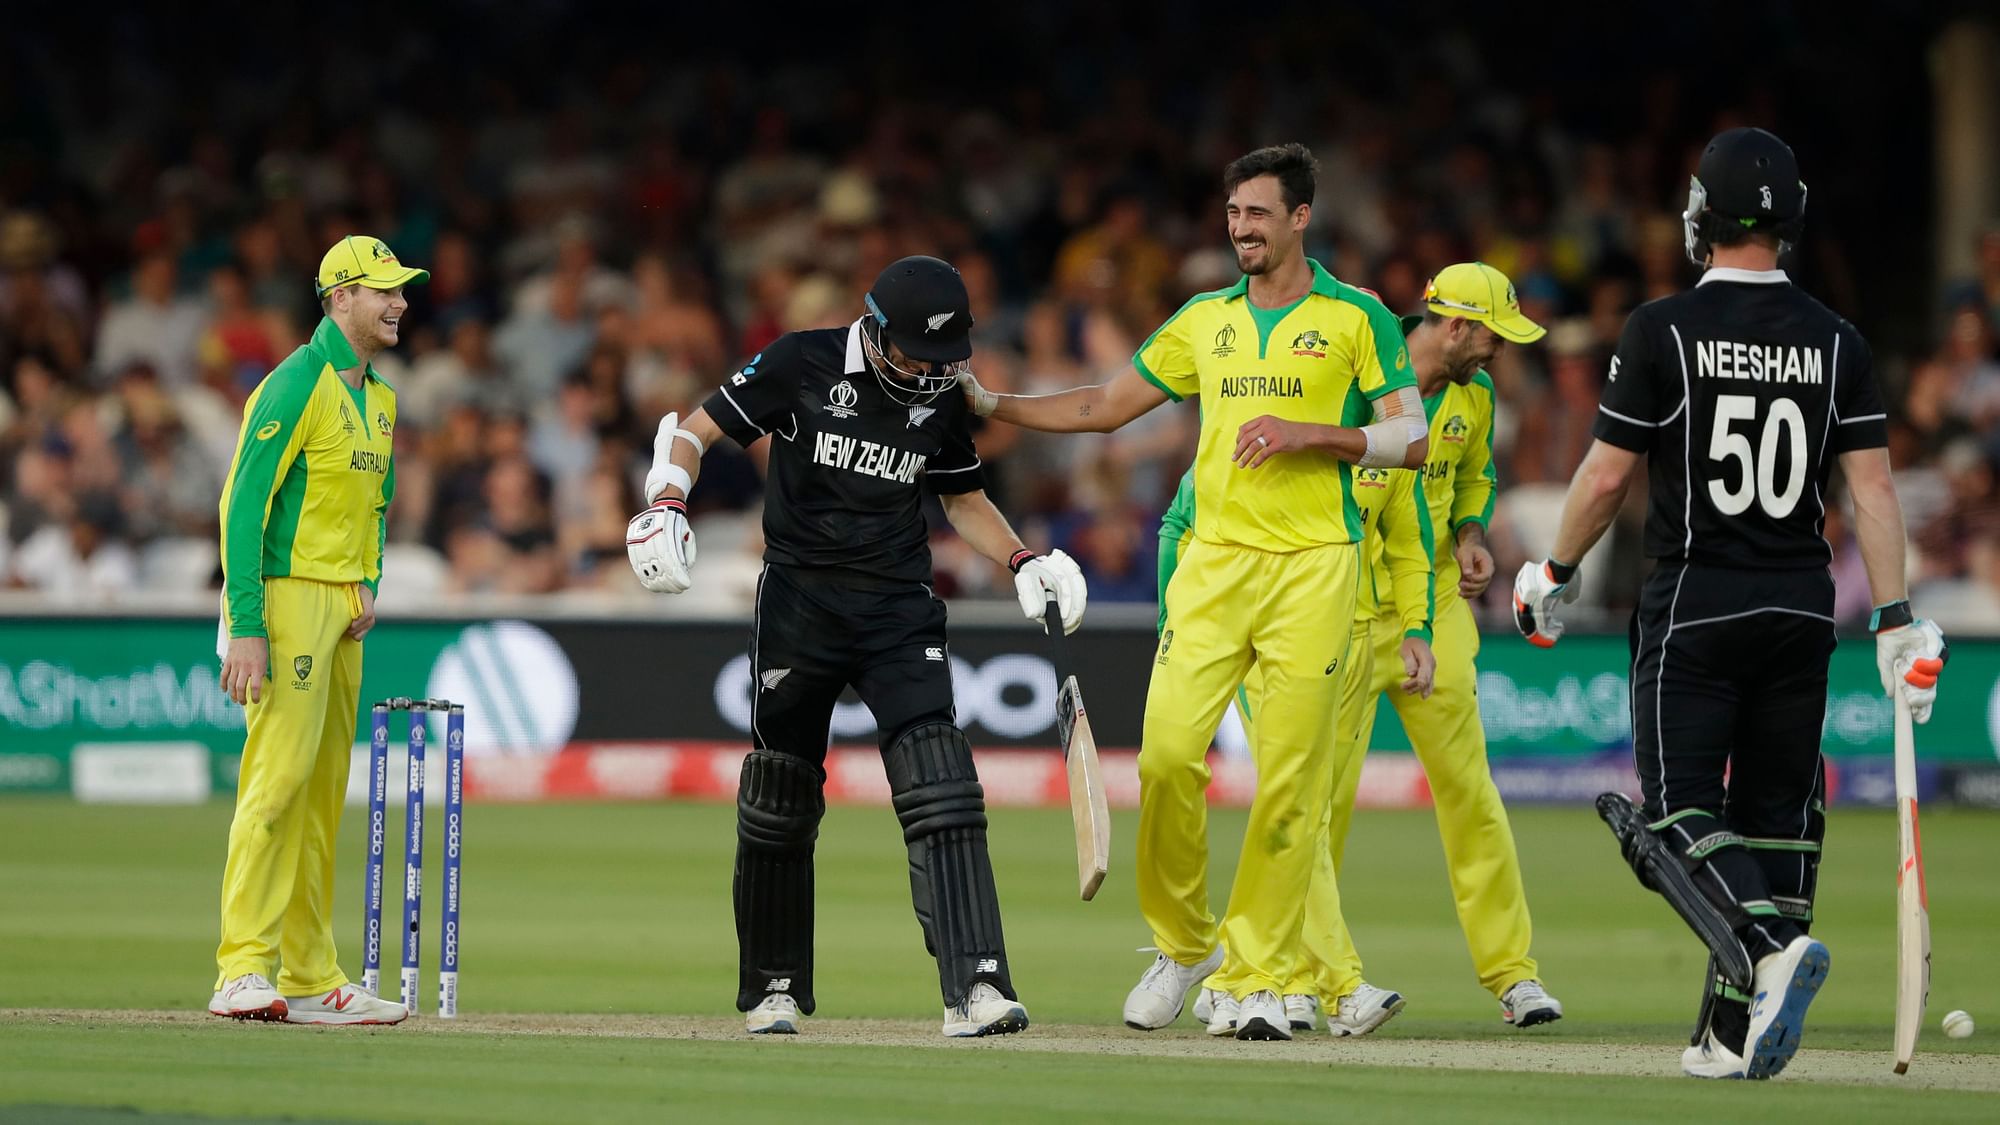 Chasing 244, New Zealand slumped to 157 all out with 38 balls to spare.